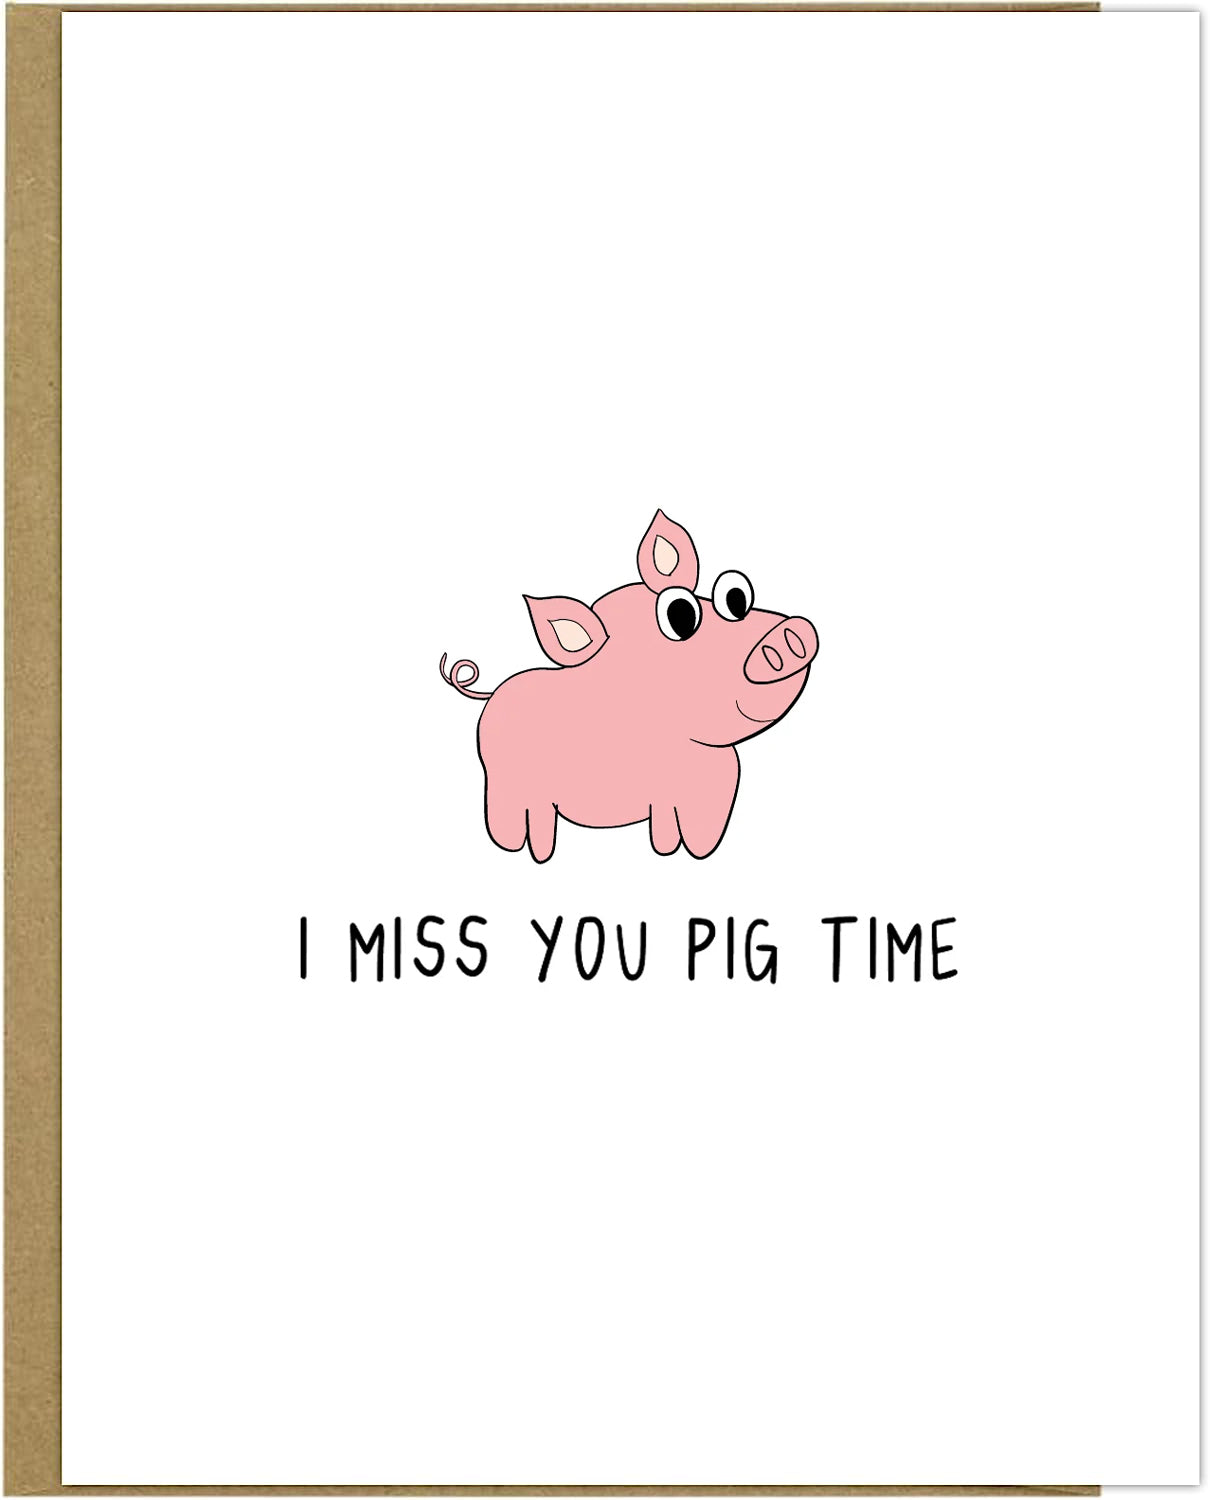 Pig Time Card